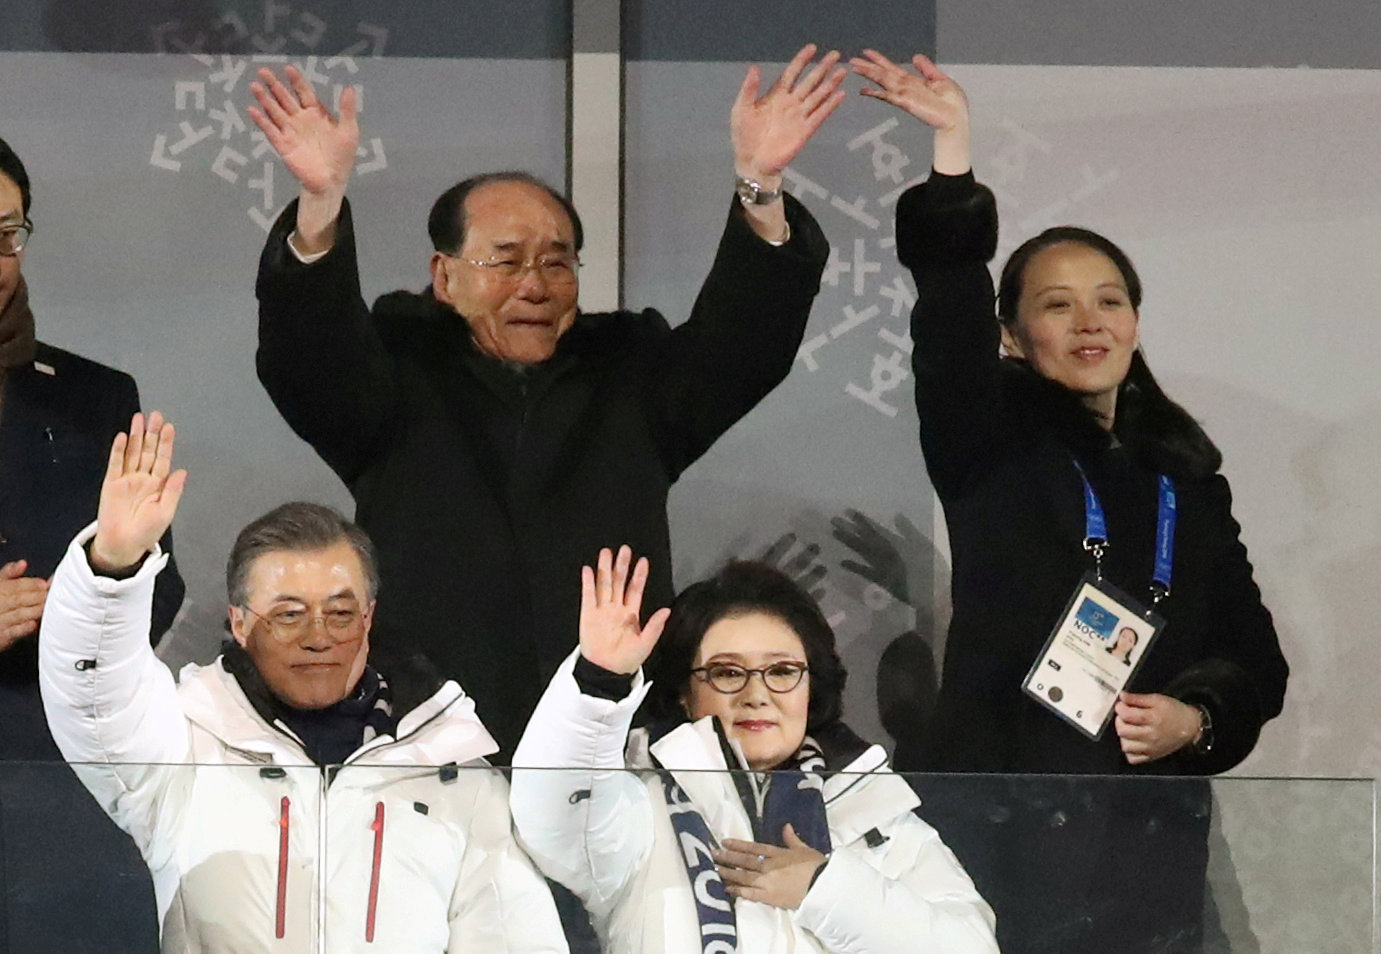 PHOTO: South Korean President Moon Jae-in and wife Kim Jung-sook, North Korea's Kim Yong Nam, and North Korean leader Kim Jong Un's sister Kim Yo Jong wave at the Winter Olympics opening ceremony in Pyeongchang, South Korea Feb. 9, 2018.  